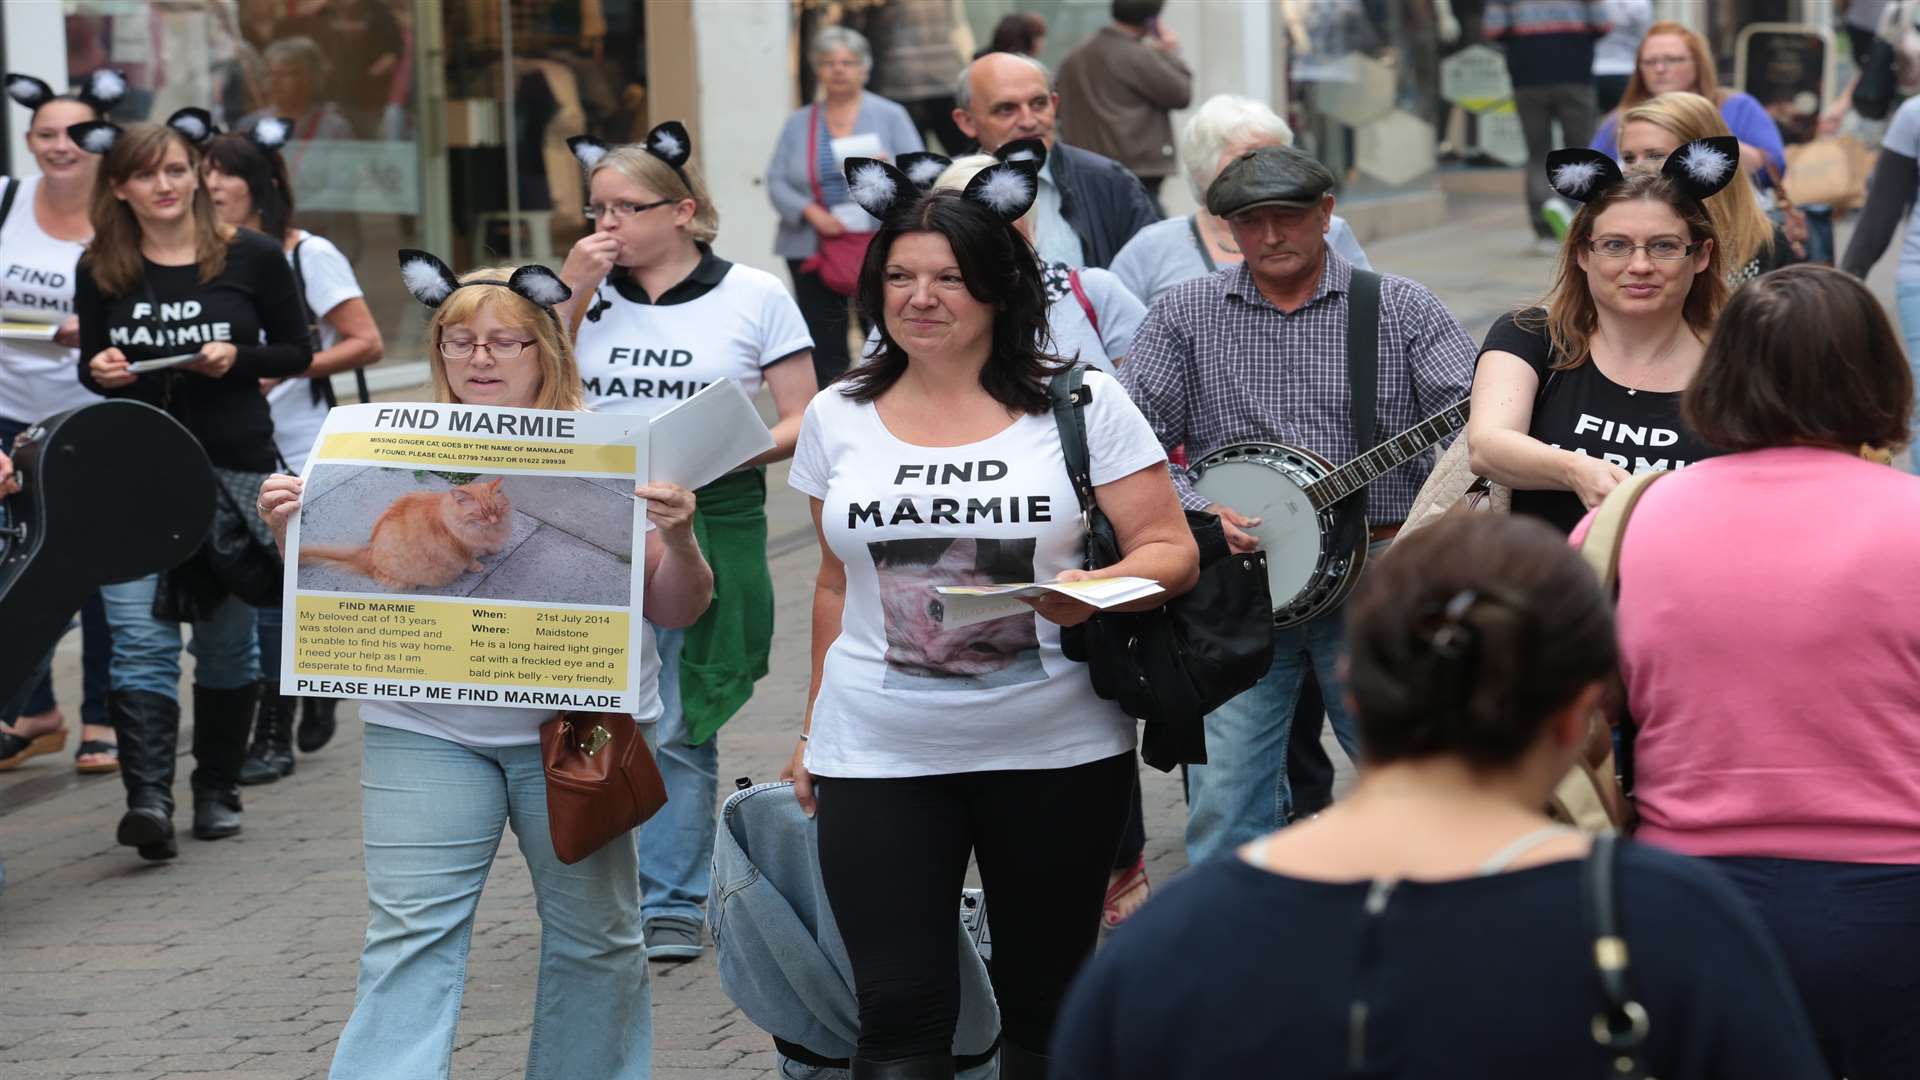 Marmie's Army was led by owner Tracy Brewster through Maidstone town centre